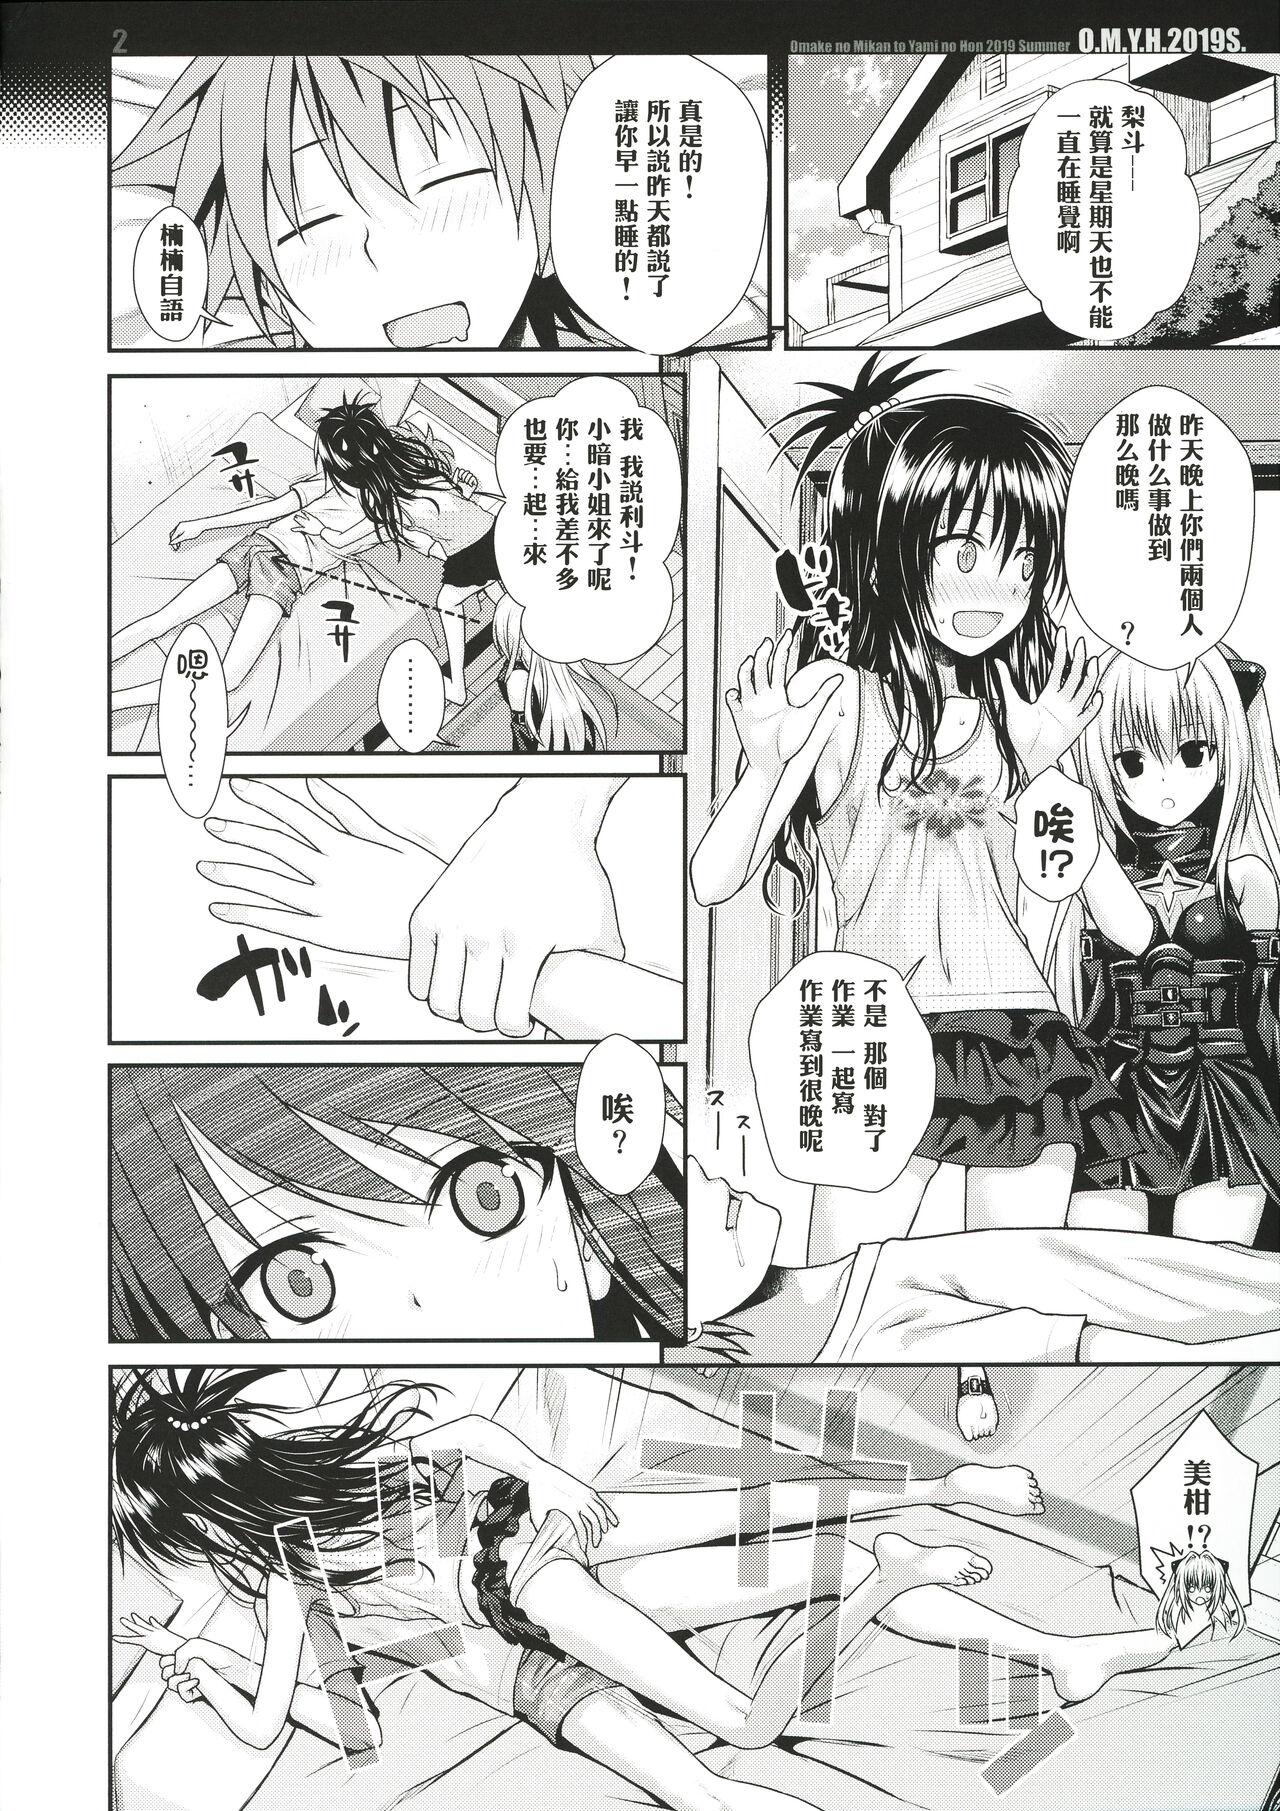 Gay Theresome O.M.Y.H.2019S. - To love ru Negro - Page 2